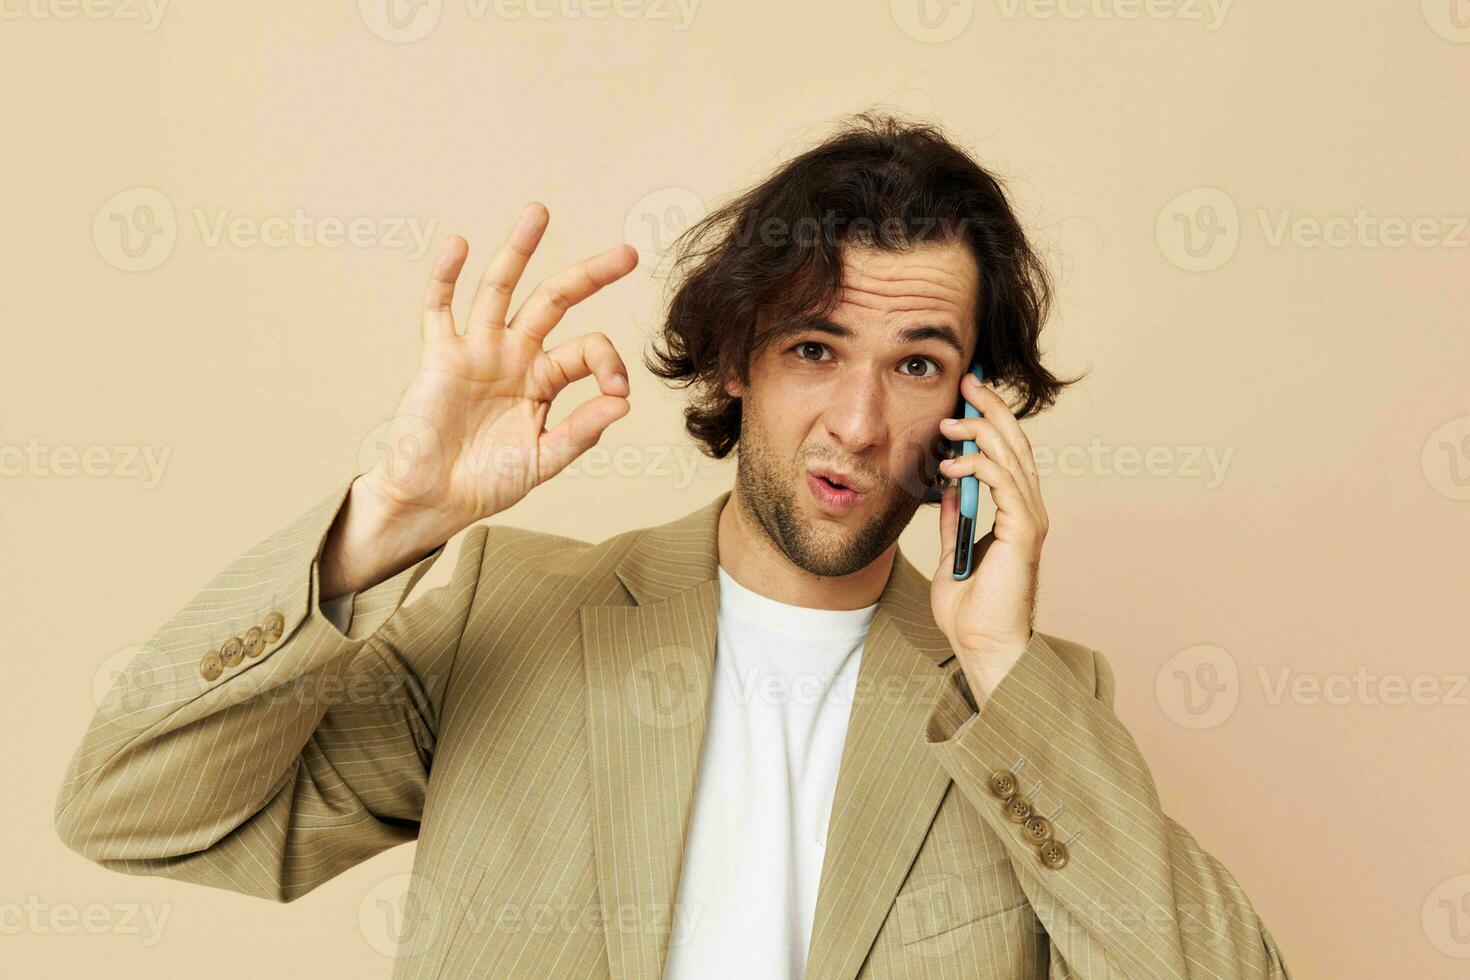 Cheerful man in a suit posing emotions talking on the phone beige background photo